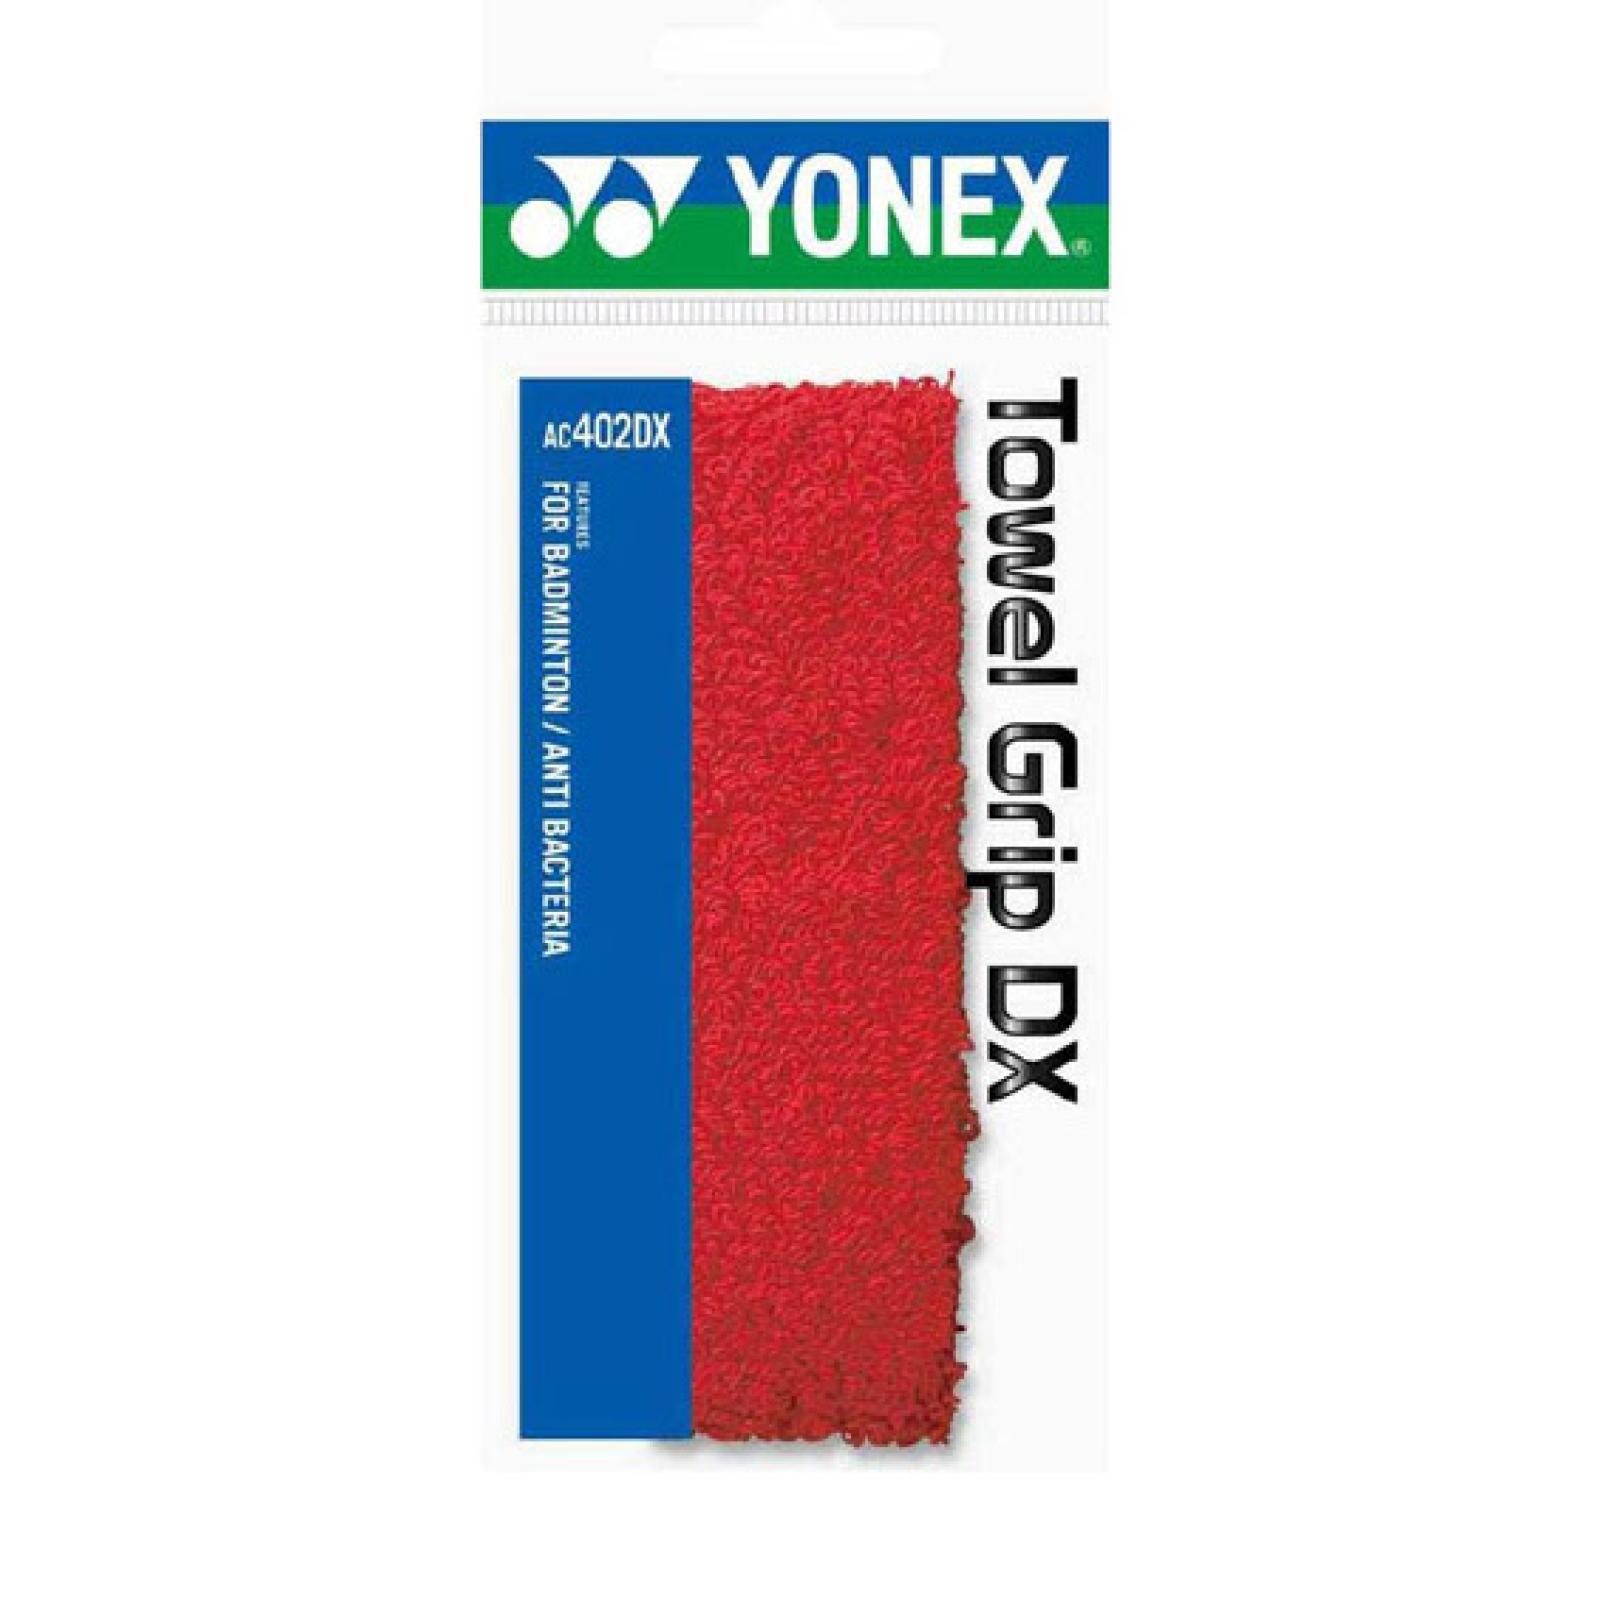 74 cm Self Adhesive/100% Cotton Made in Japan 2 Packs Yonex Towel Grips AC402DX 